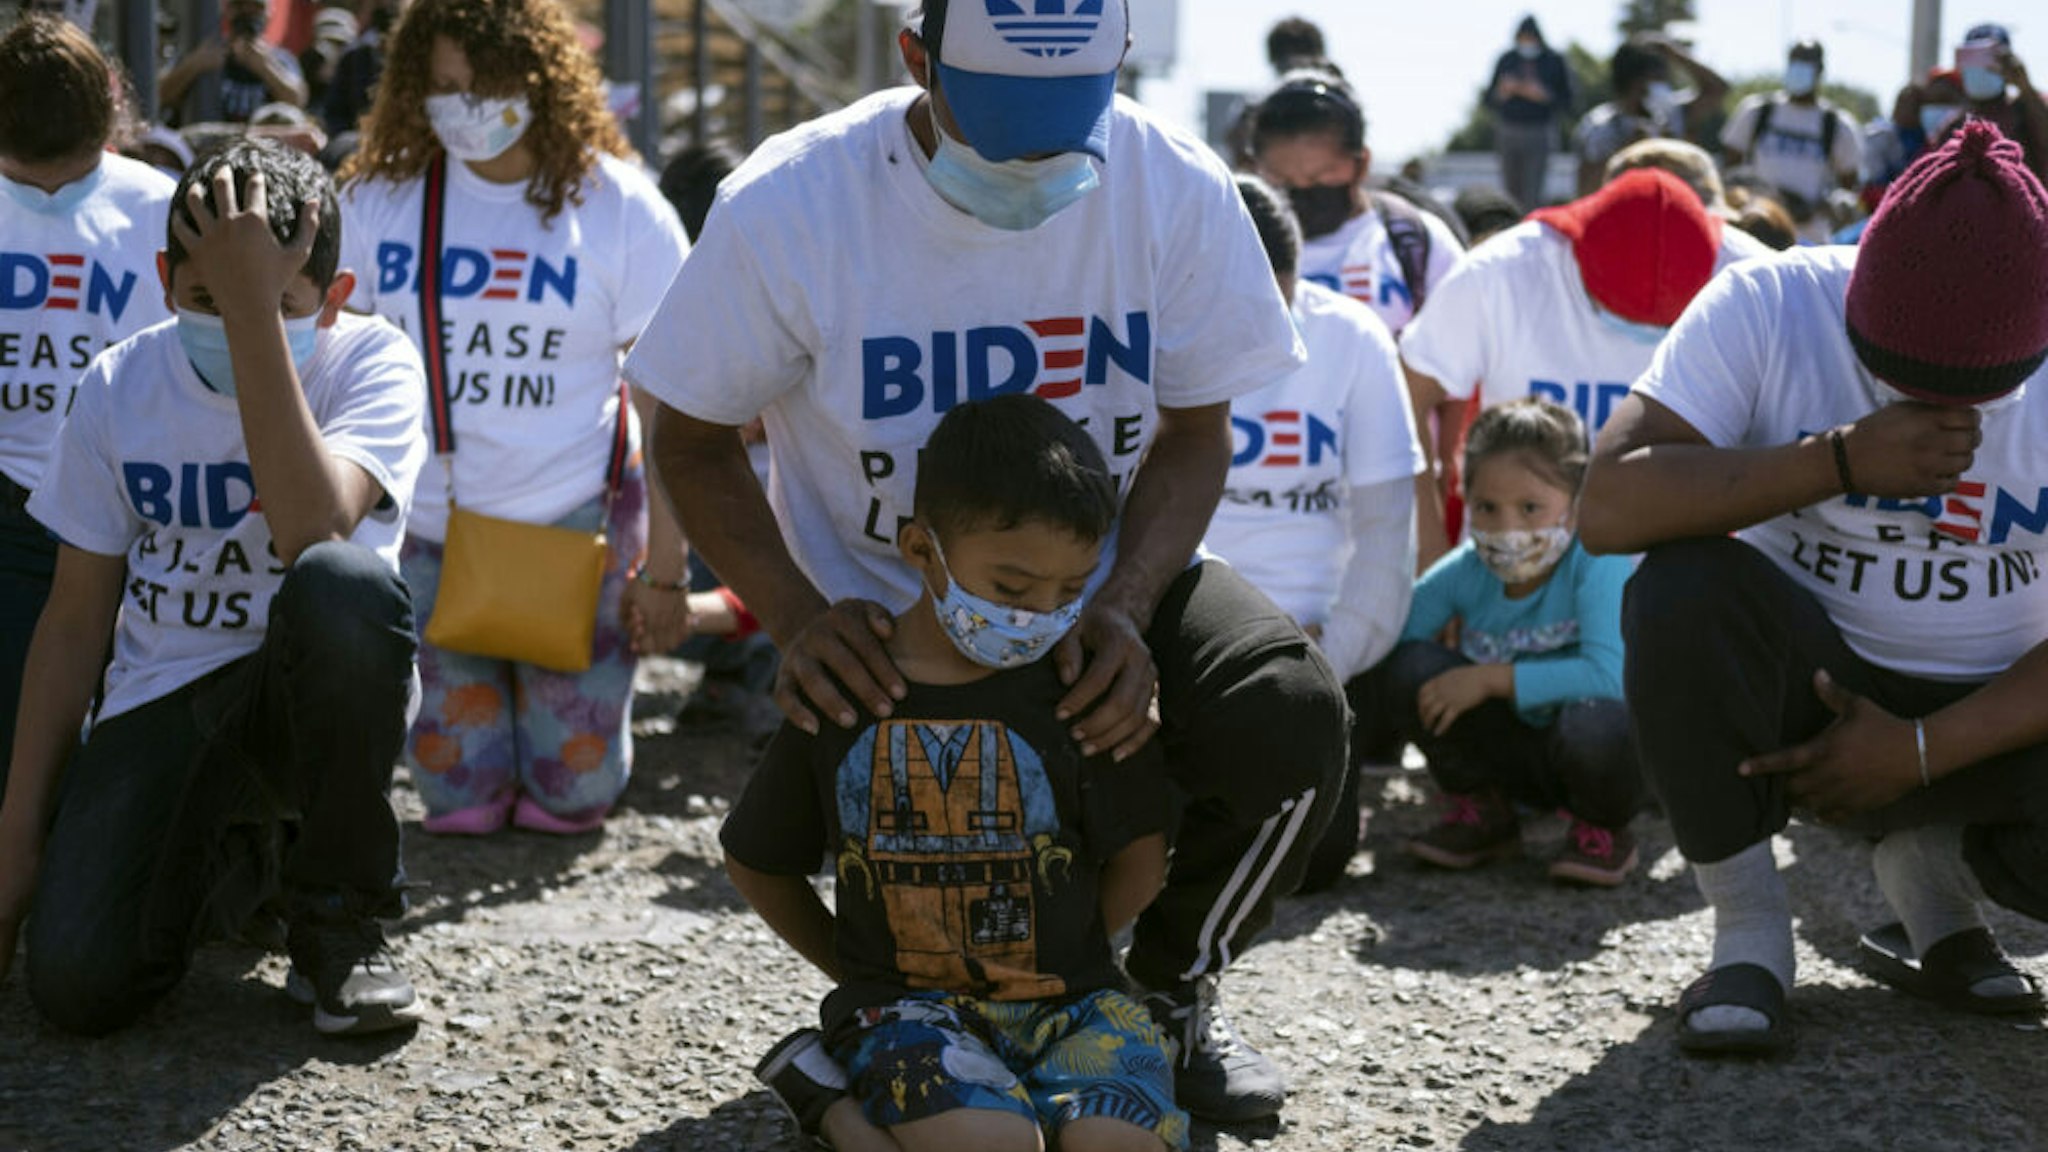 TOPSHOT - Yadiel Garcia and his father Fabricio, from Honduras, kneel as they pray during a migrant demonstration demanding clearer United States migration policies, at San Ysidro crossing port in Tijuana, Baja California state, Mexico on March 2, 2021. - Thousands of migrants out of the Migrant Protection Protocol (MPP) program are stranded along the US-Mexico border without knowing when or how they will be able to start their migratory process with US authorities.